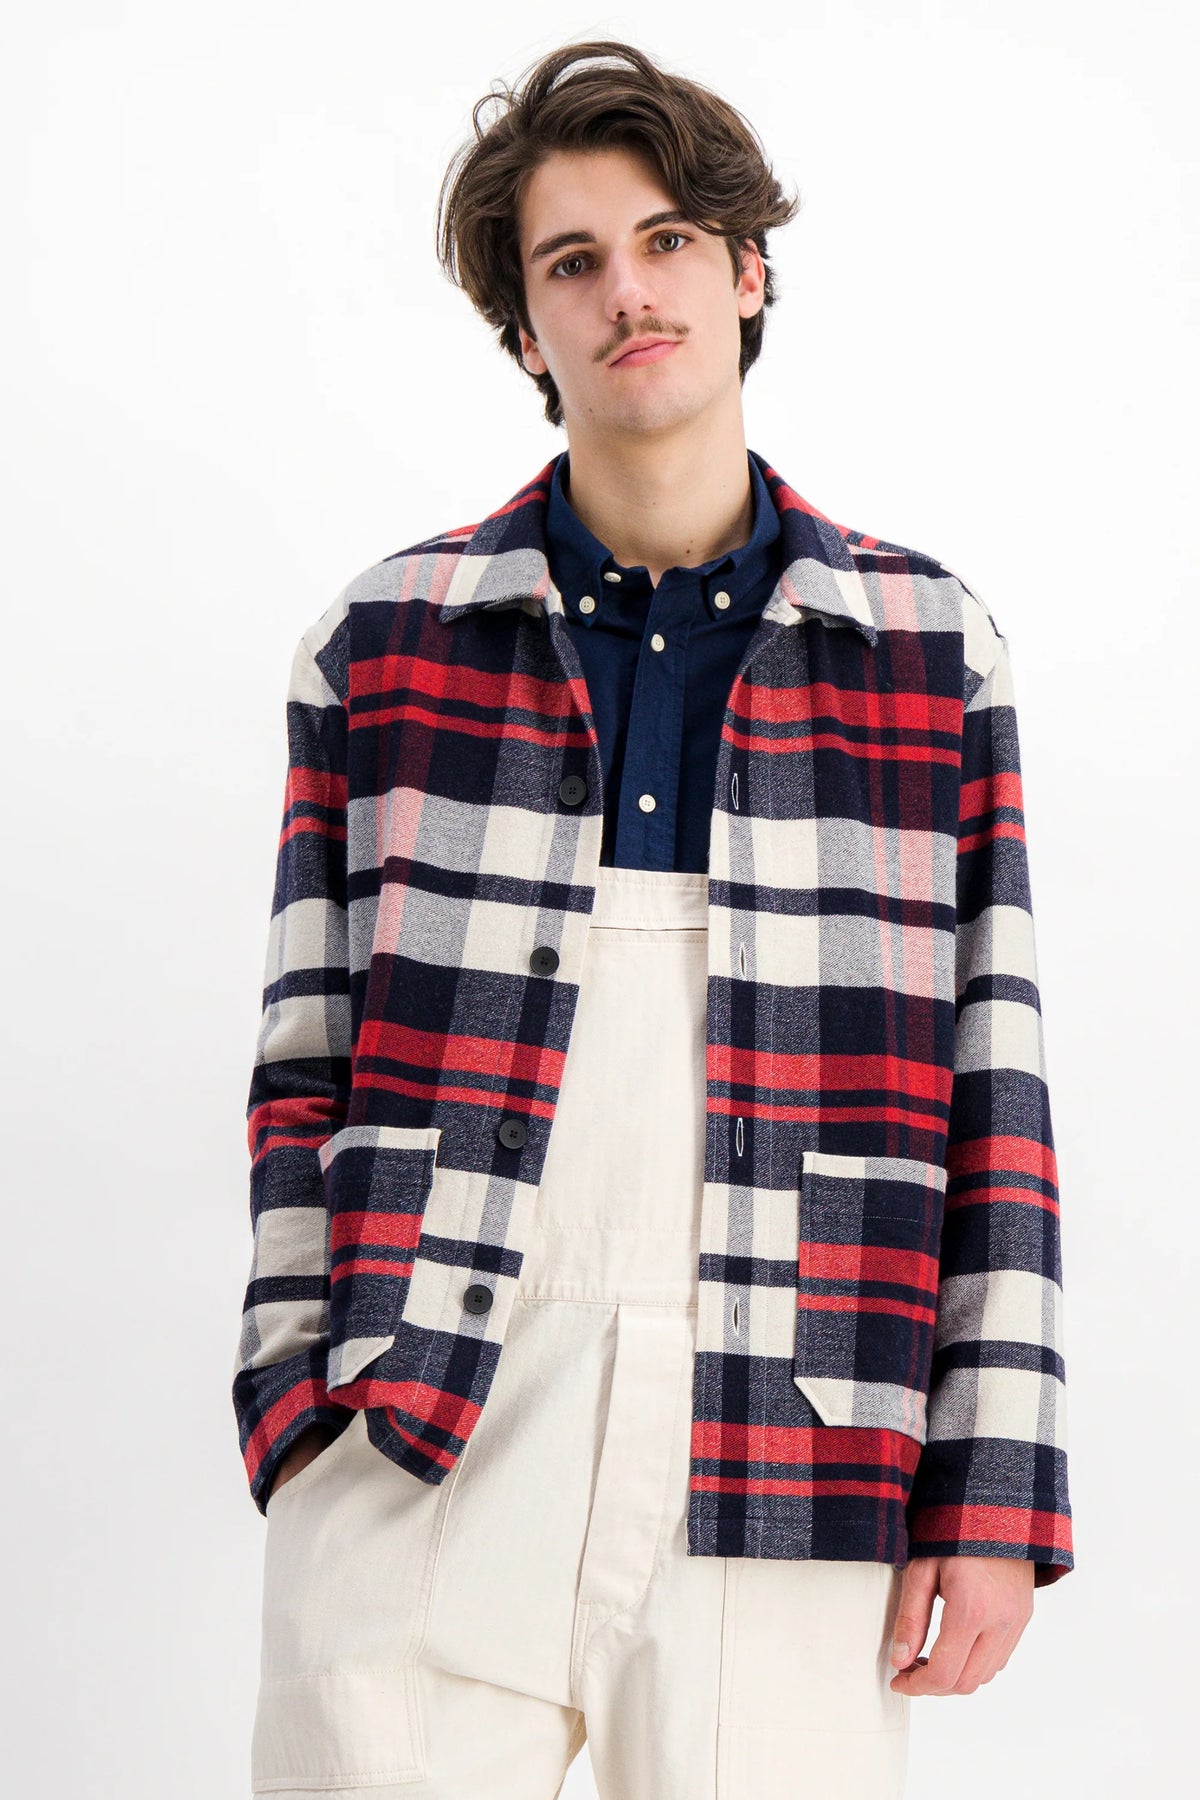 PARAGES CLOTHING Hockney Wool Check Overshirt